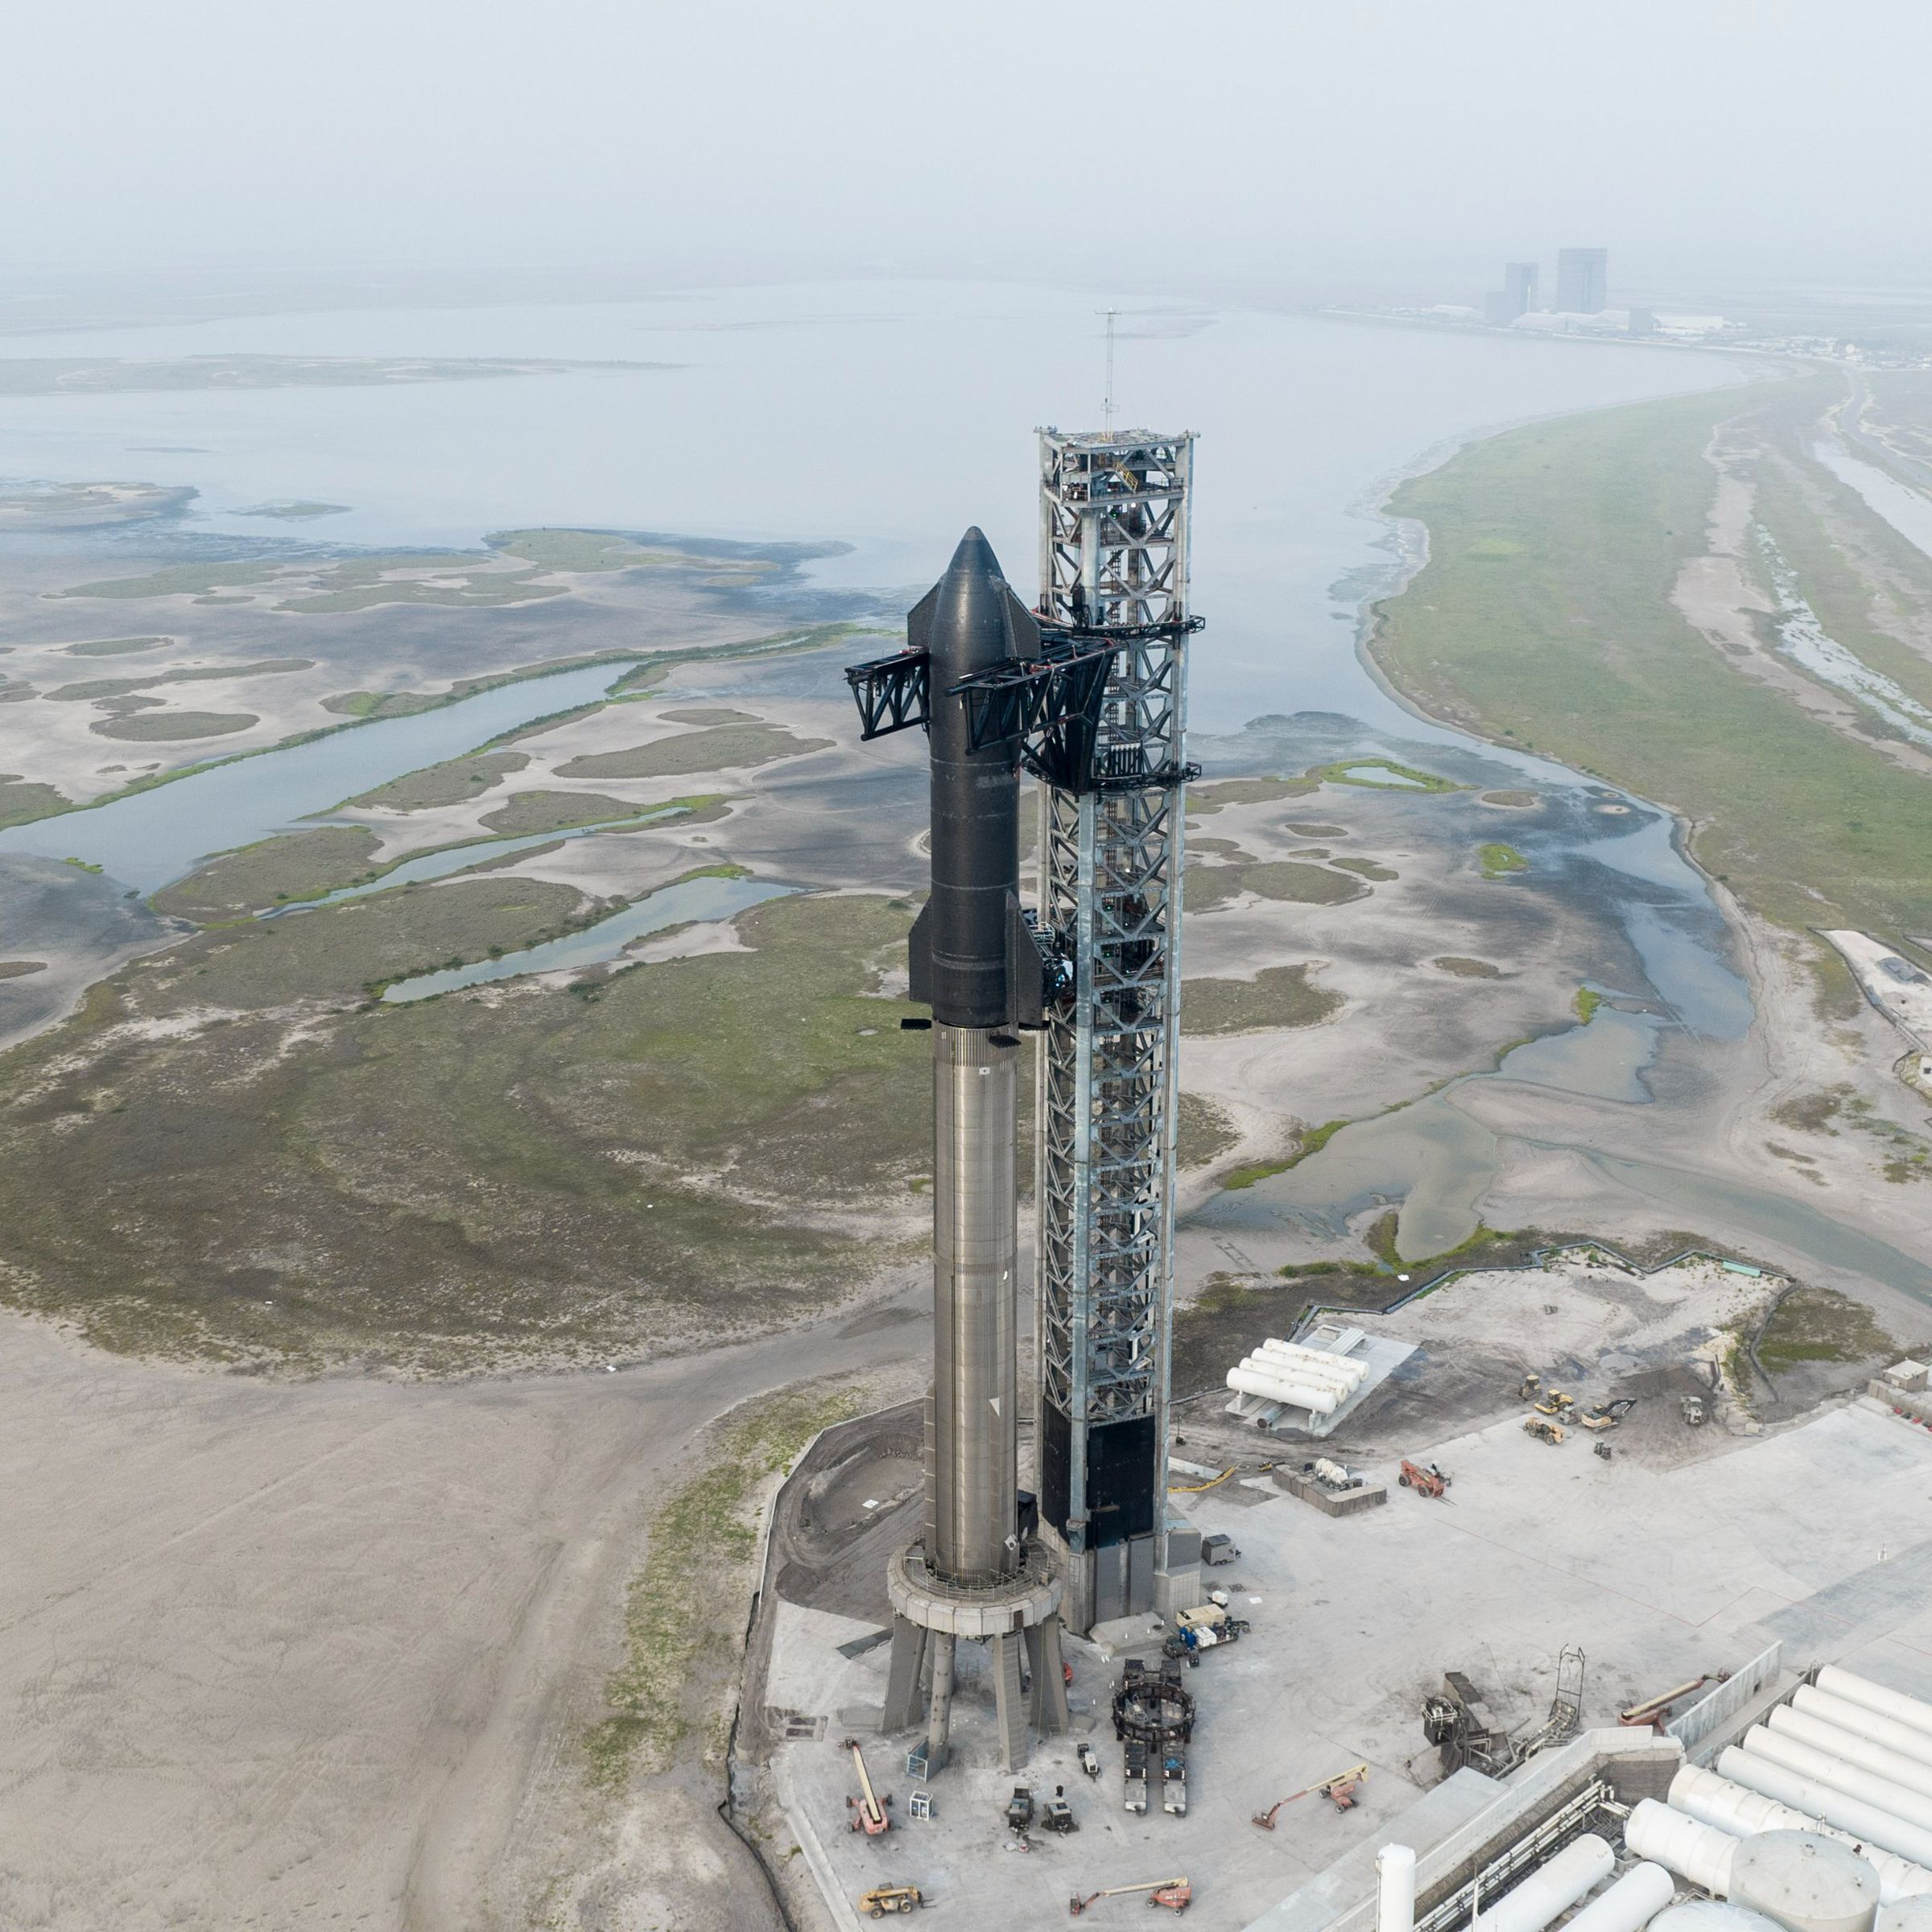 Zoomed-out landscape of SpaceX’s Starbase in Boca Chica, Texas, showing a water landscape in the back and the rocket front and center.